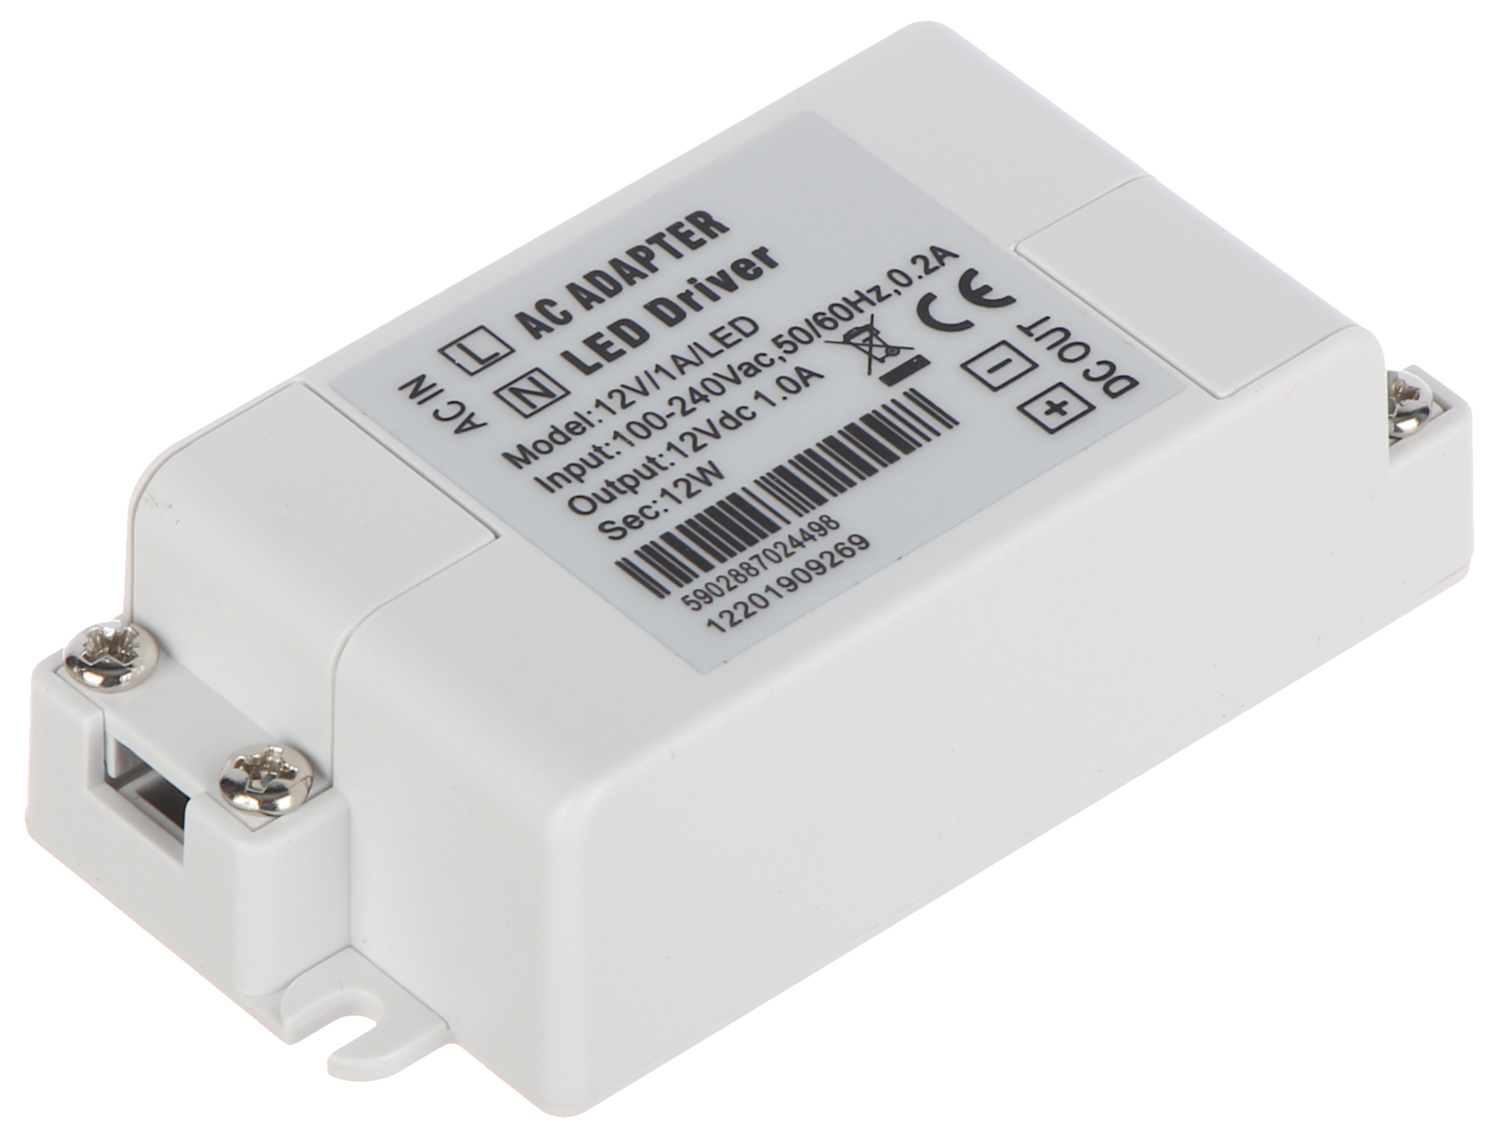 SWITCHING ADAPTER 12V/1A/LED - Power Adapters Modules - Delta